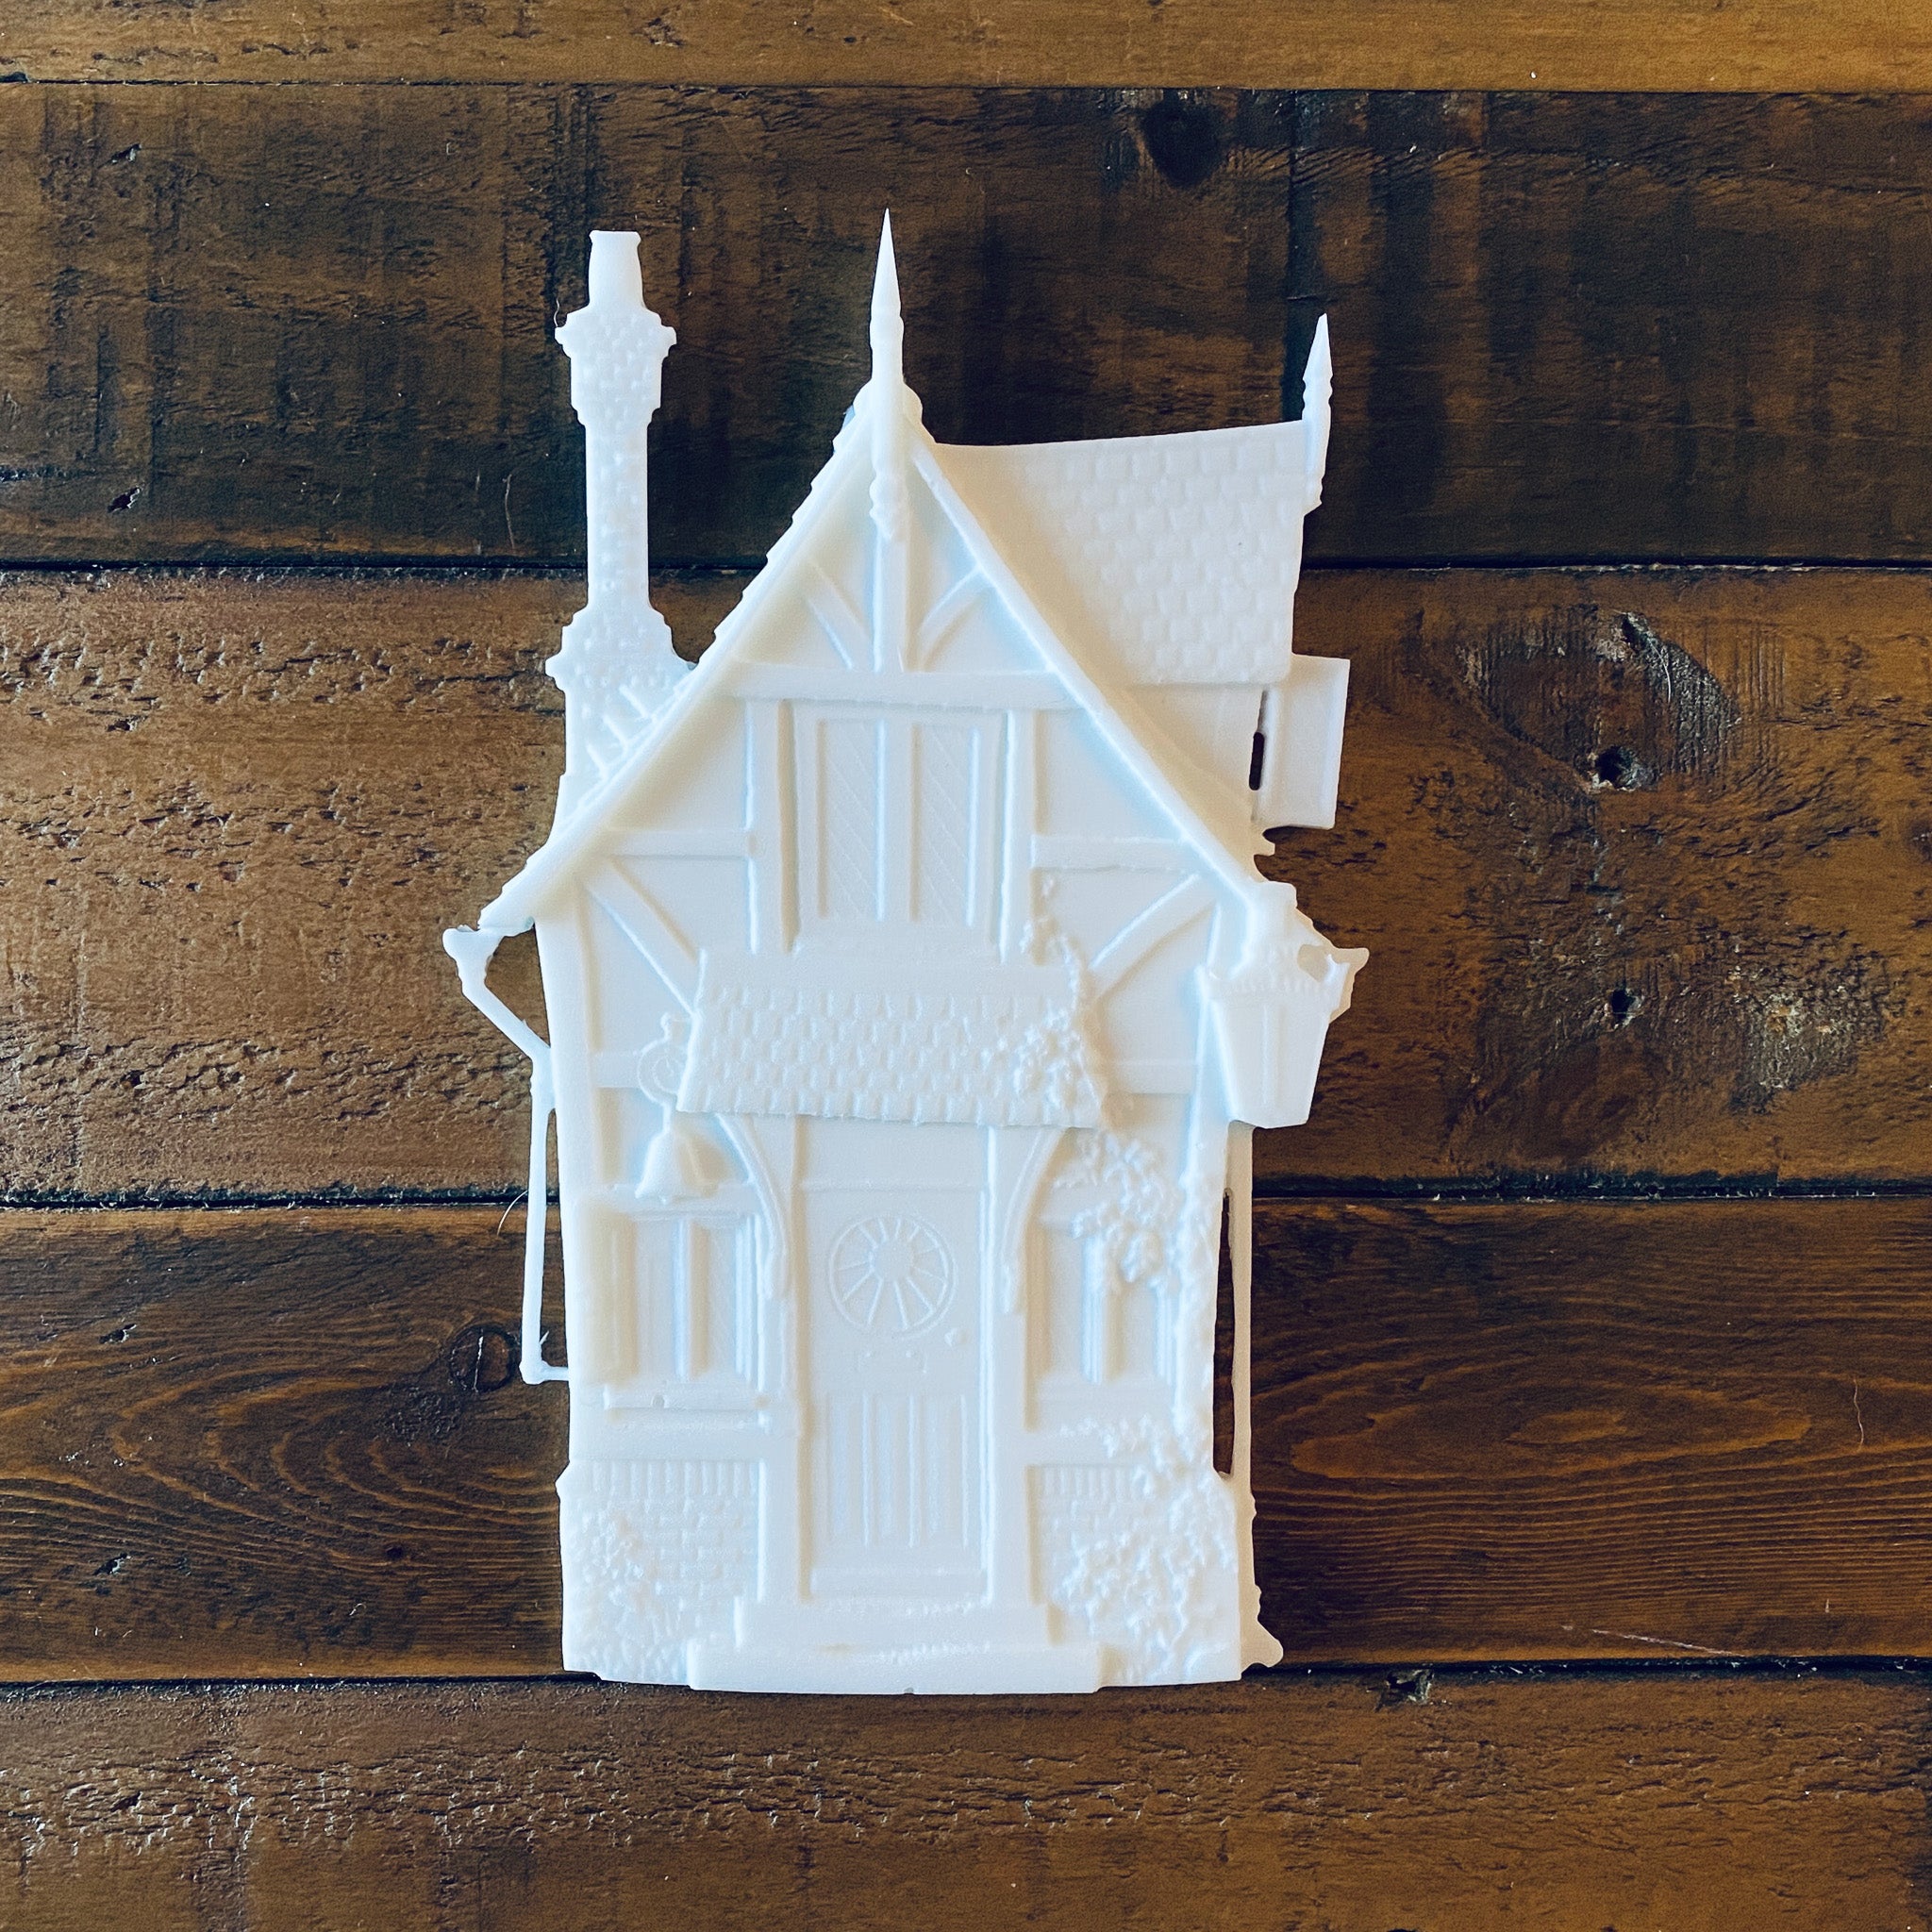 A white resin silicone mold casting of a small Victorian style fairy house is against a wood background.